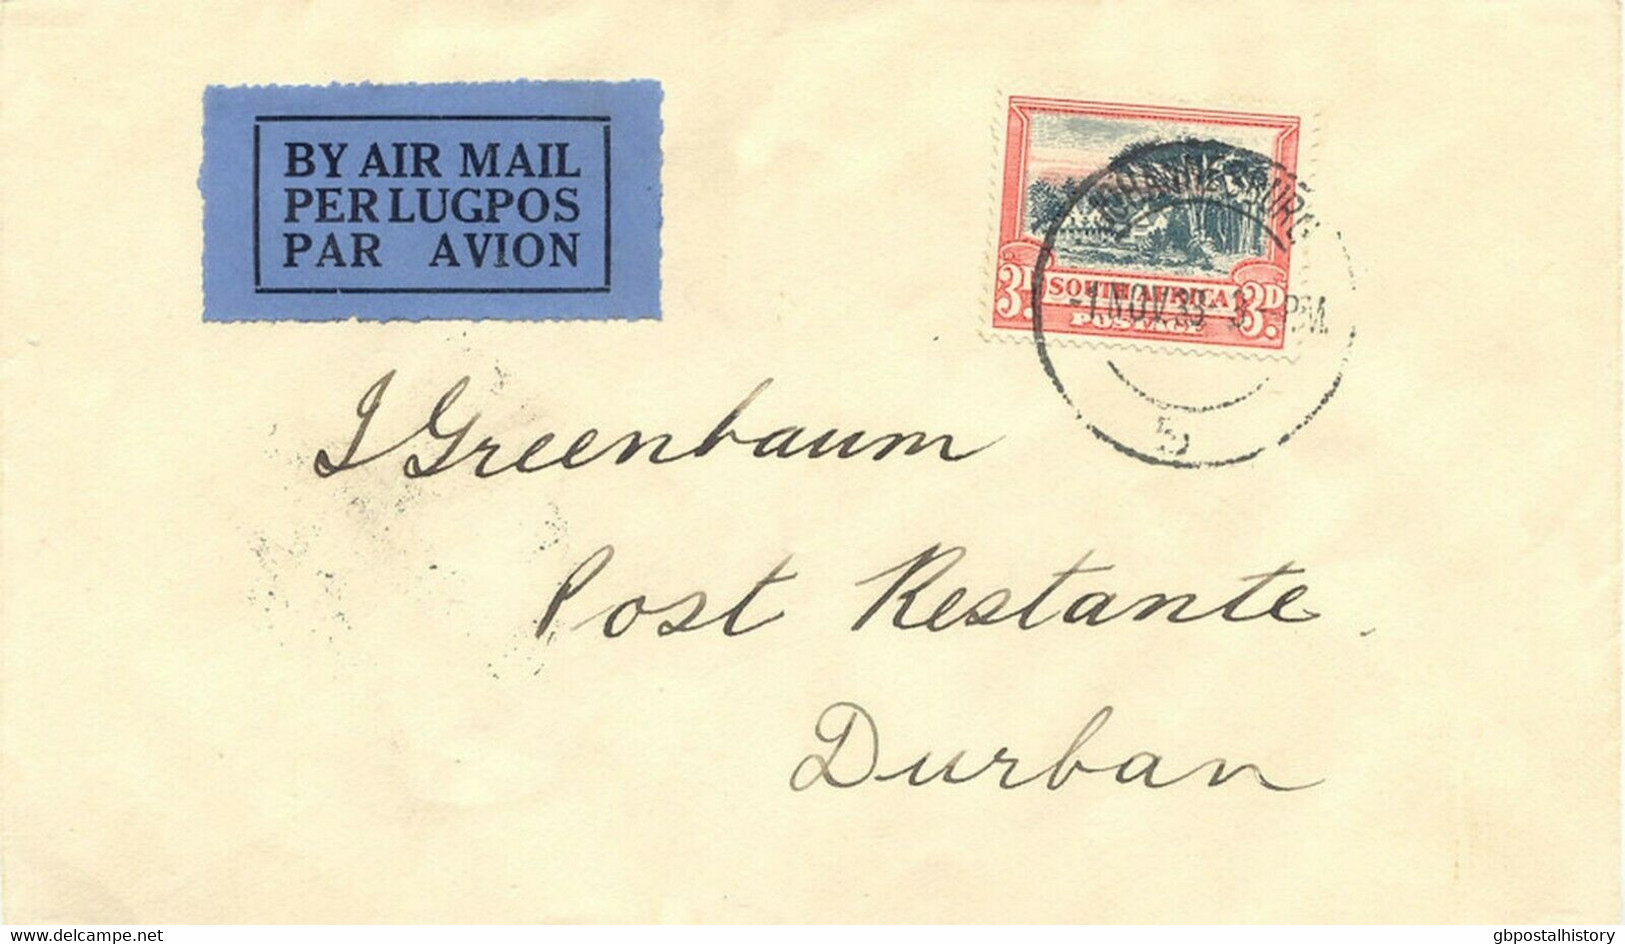 SOUTH AFRICA 1933 First Day For Reduced 3d Airmail Postage JOHANNESBURG - DURBAN - FDC